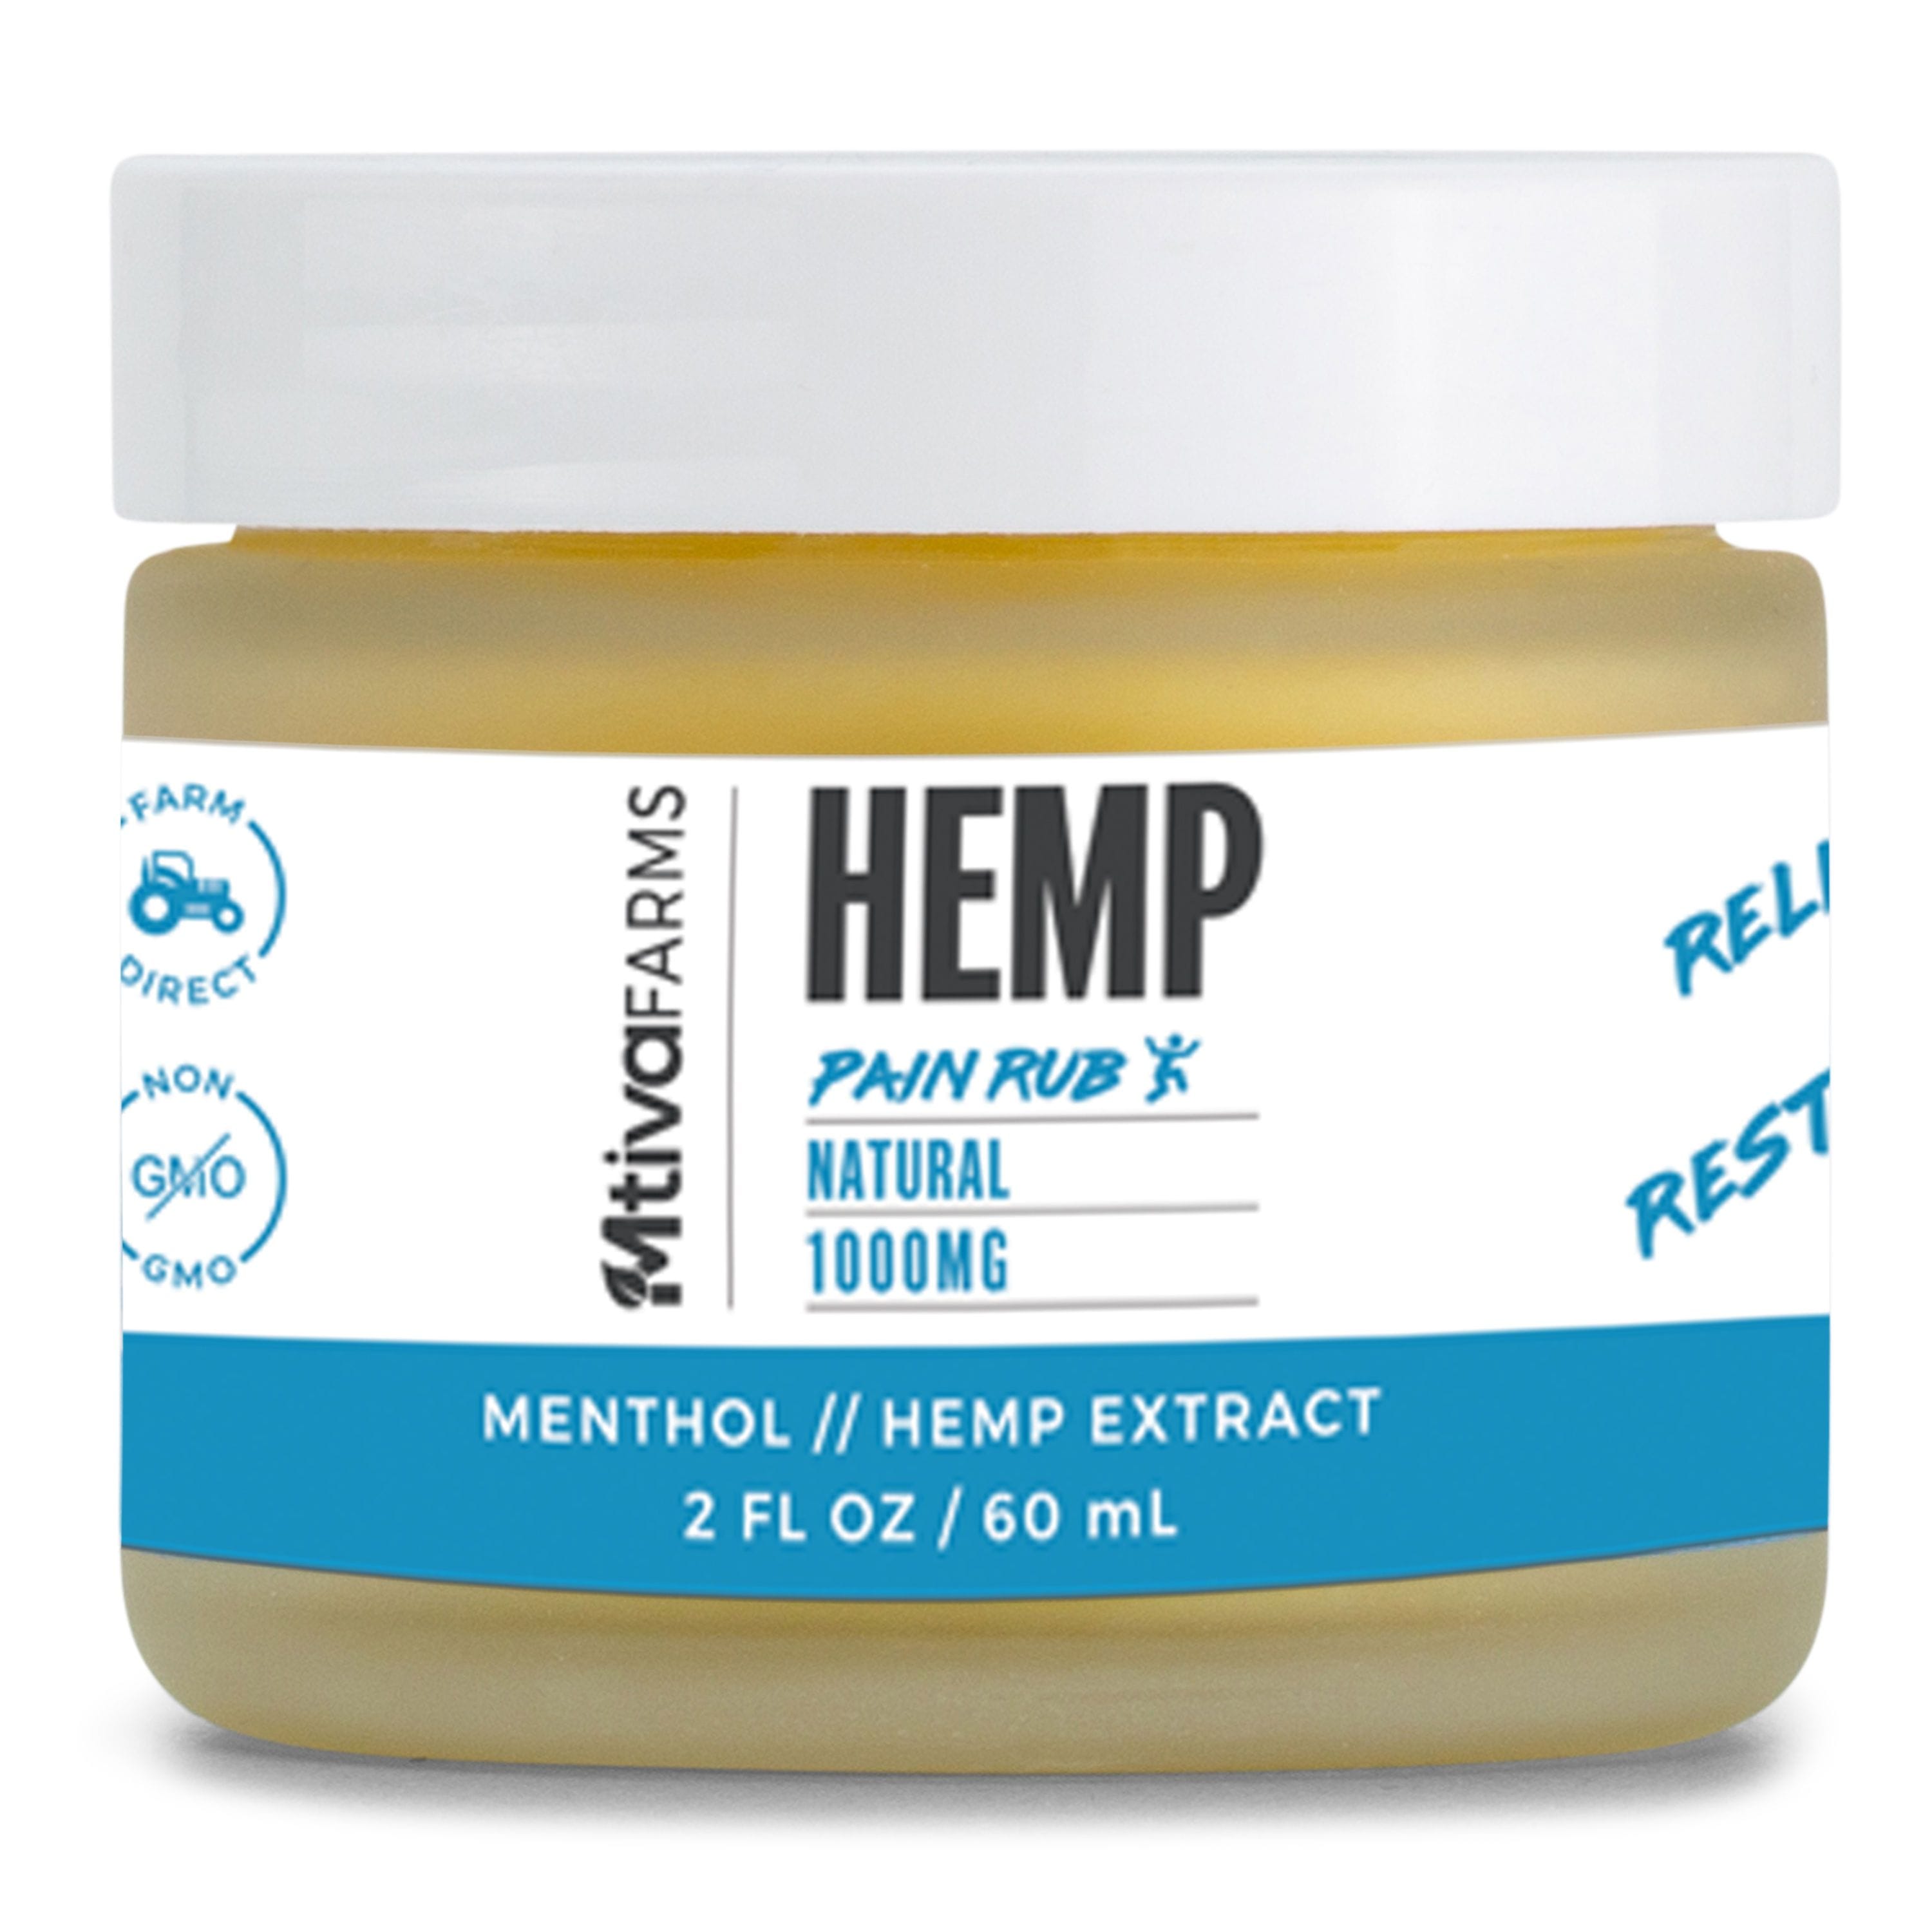 Hemp Salve for Pain Relief - Farm Direct - Made in the USA - Natural Hemp Extract Salve - For discomfort in Joints, Muscles and Back